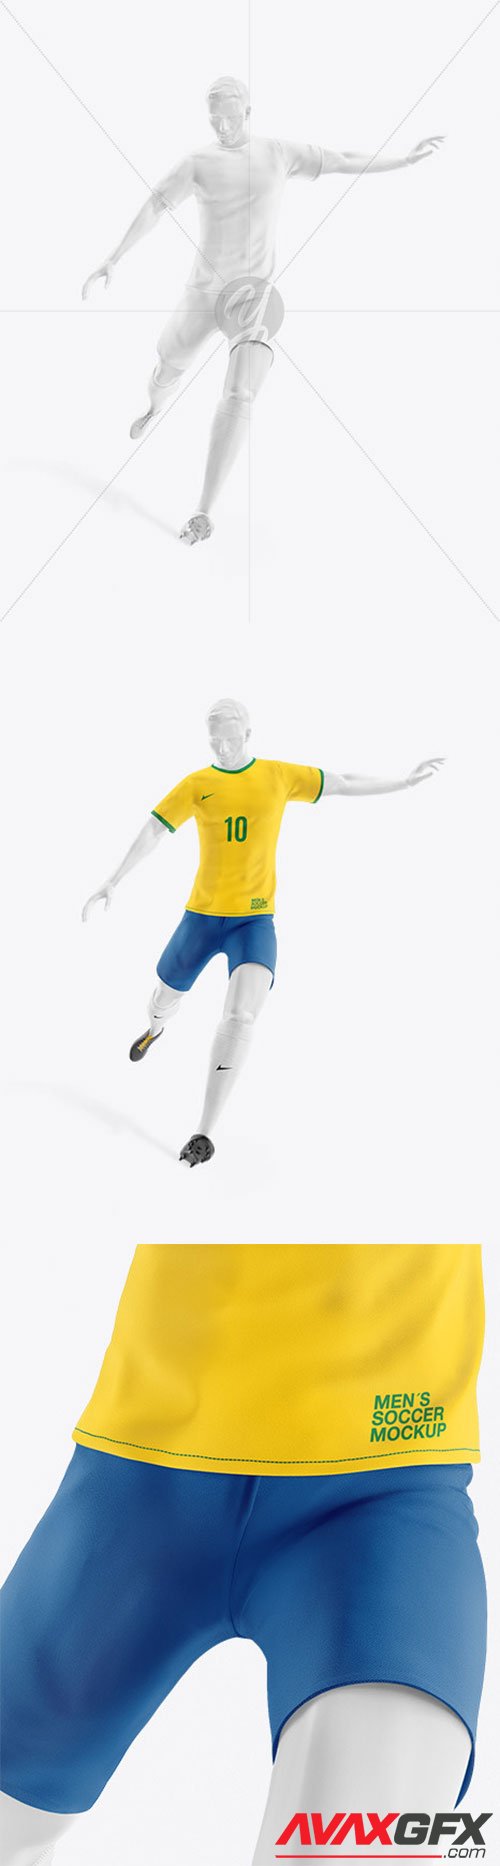 Soccer Team Kit Mockup with Mannequin - Front View 62414 ...